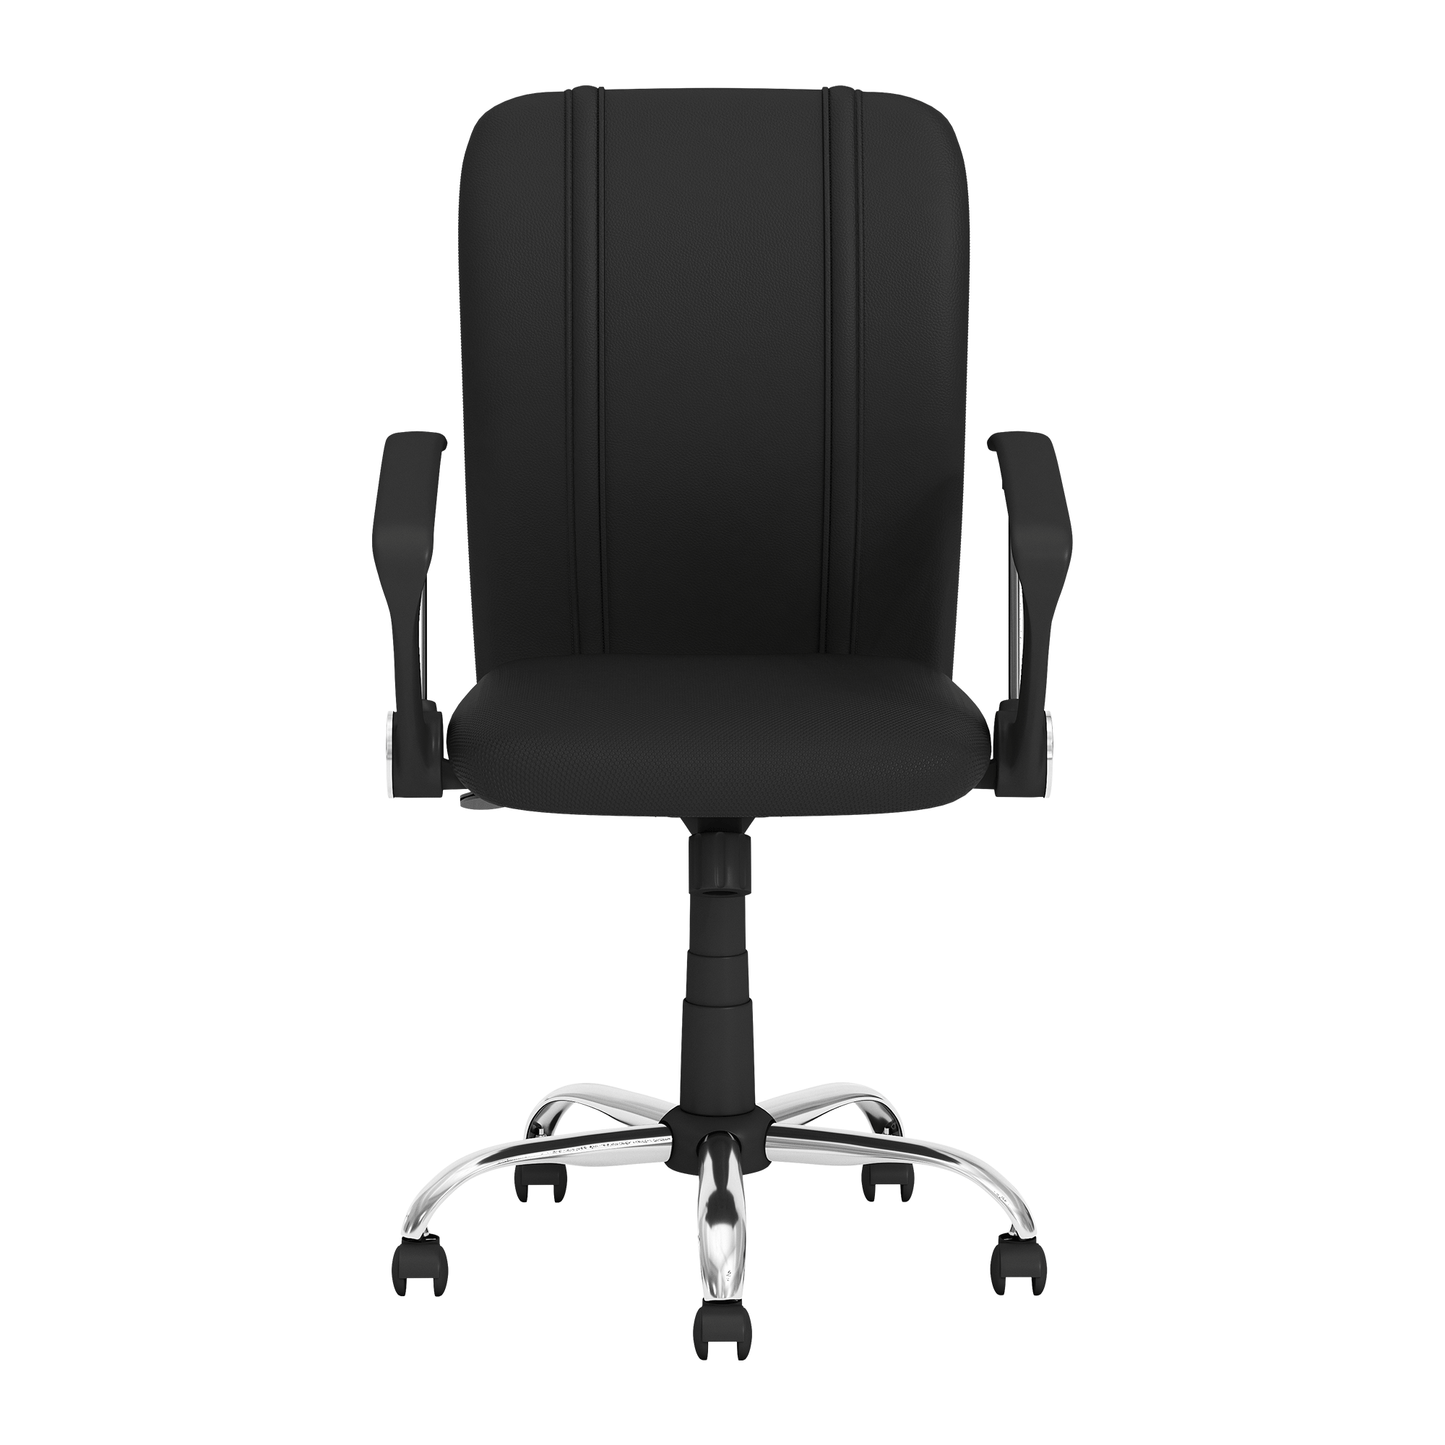 Curve Task Chair with Ghoulish Rising Hand Halloween Logo